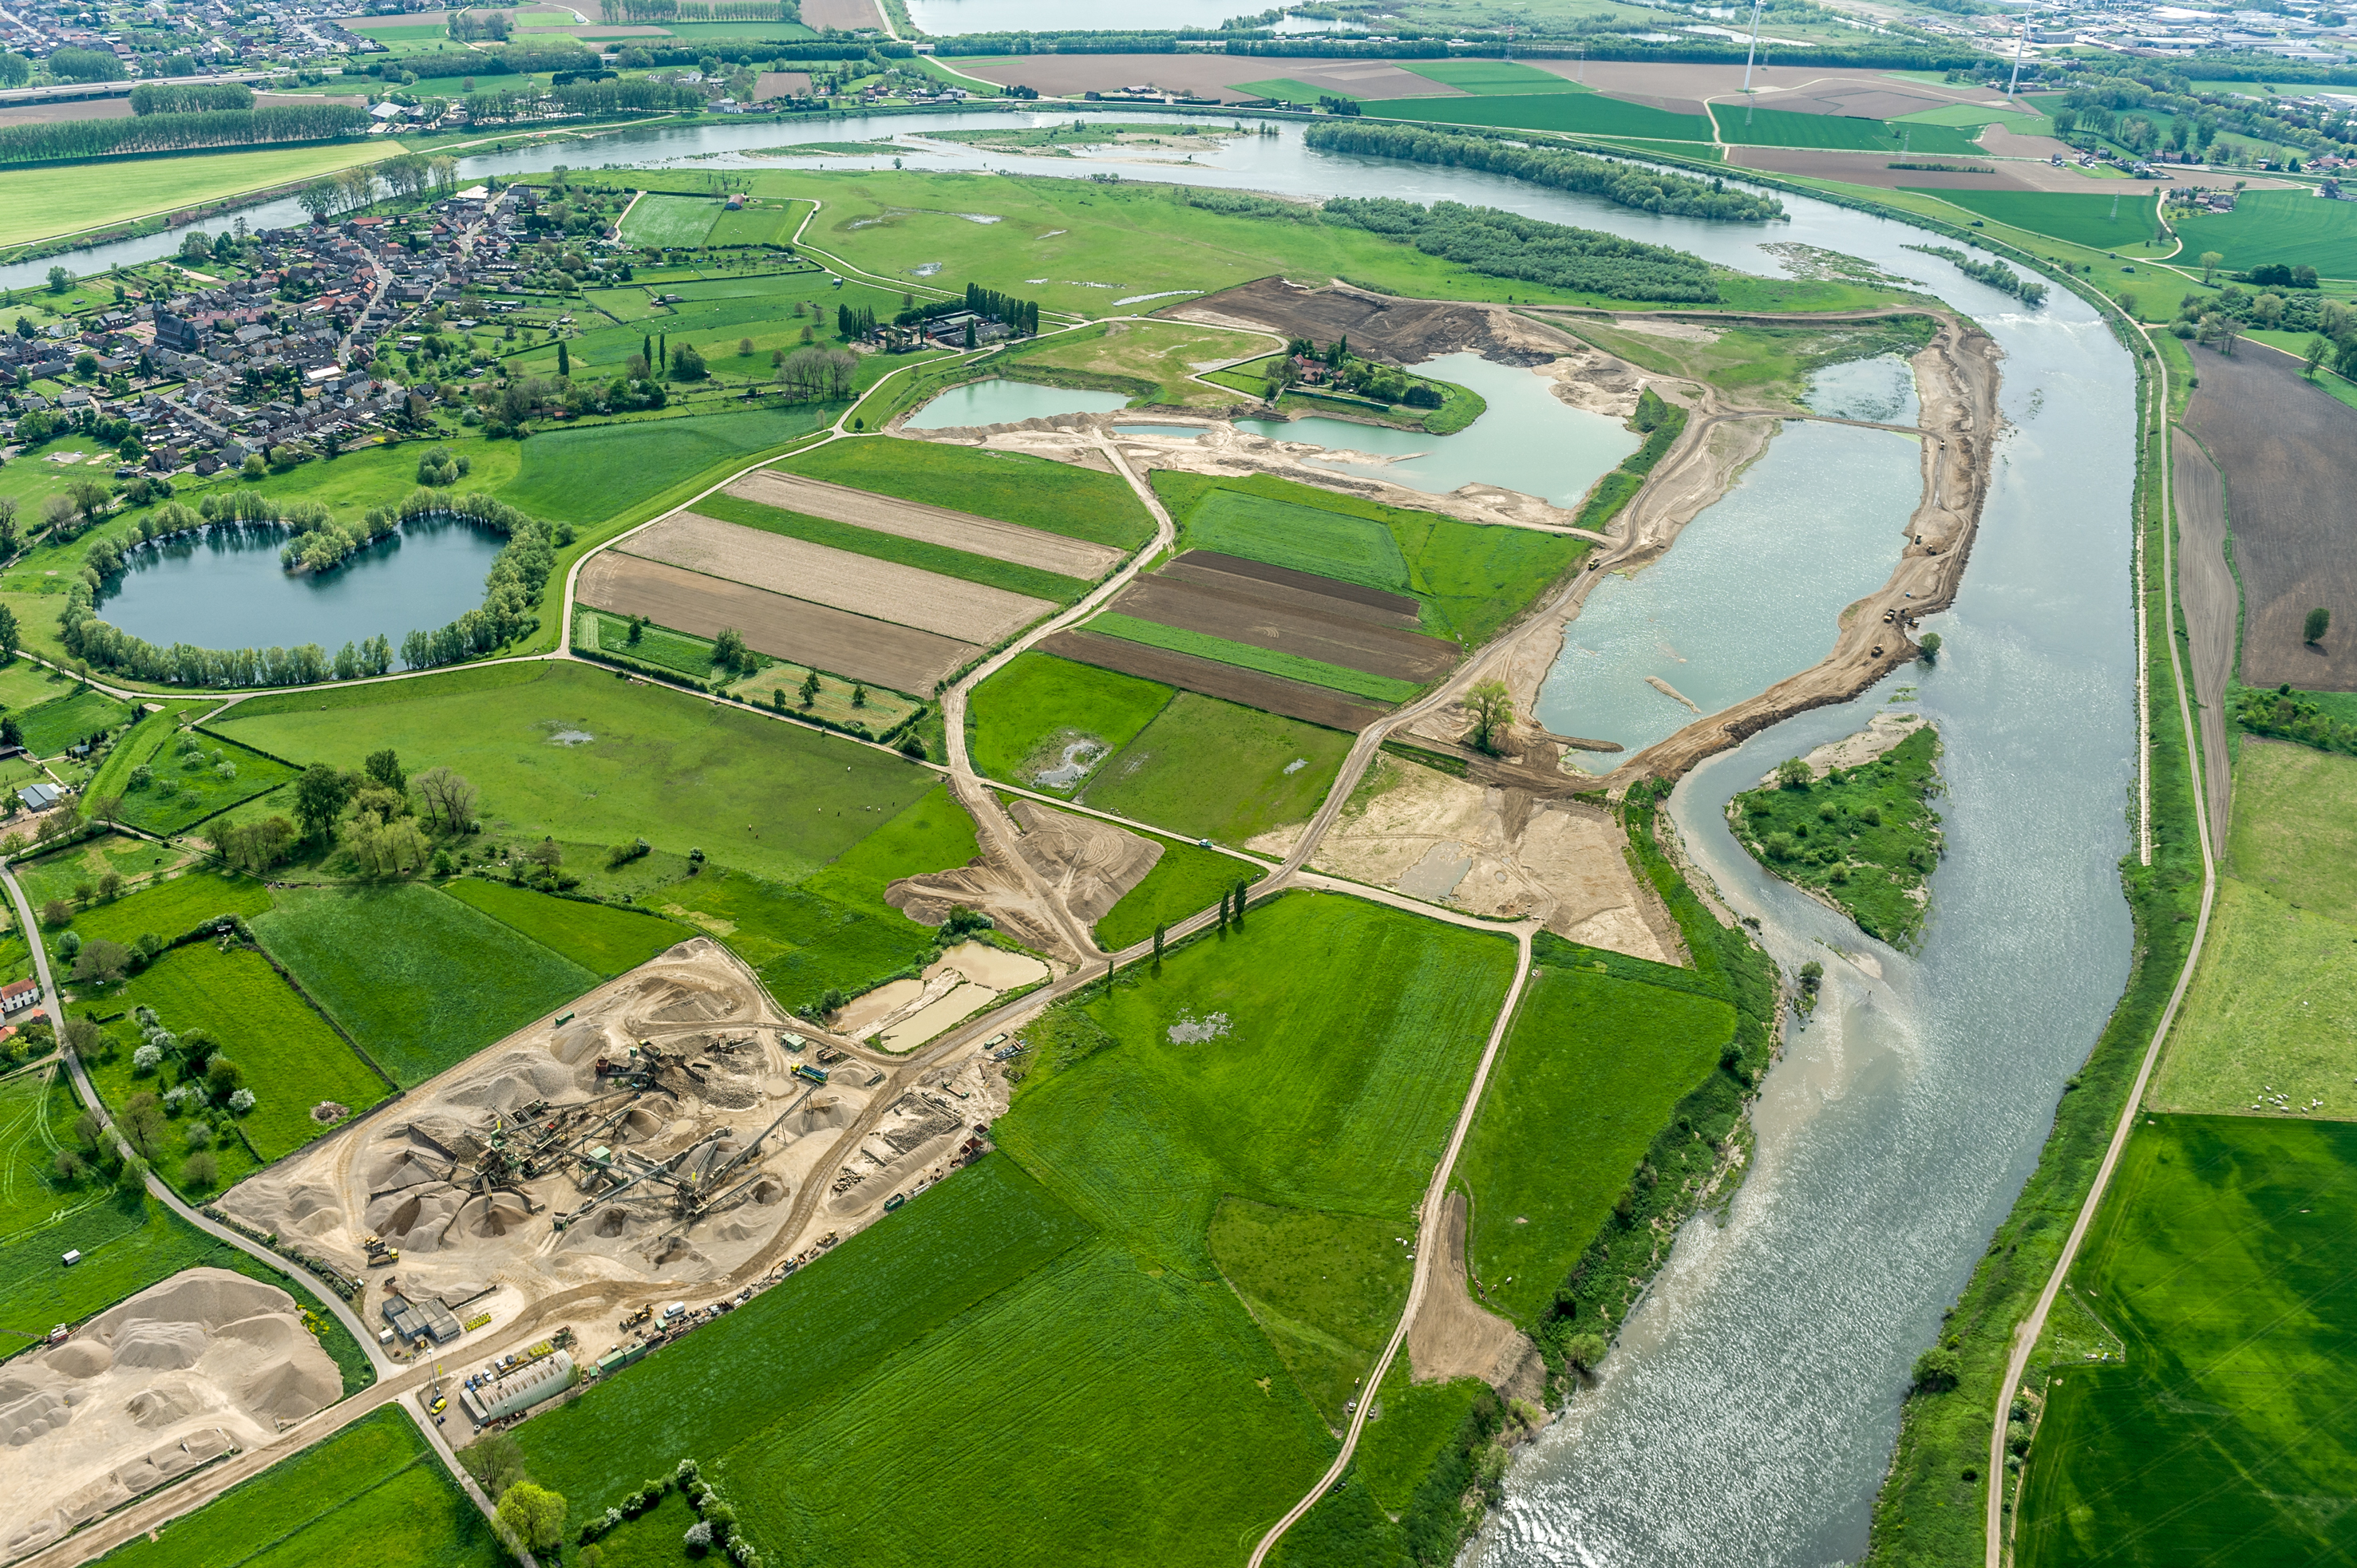 Sand and Gravel extraction in Meers, aerial view